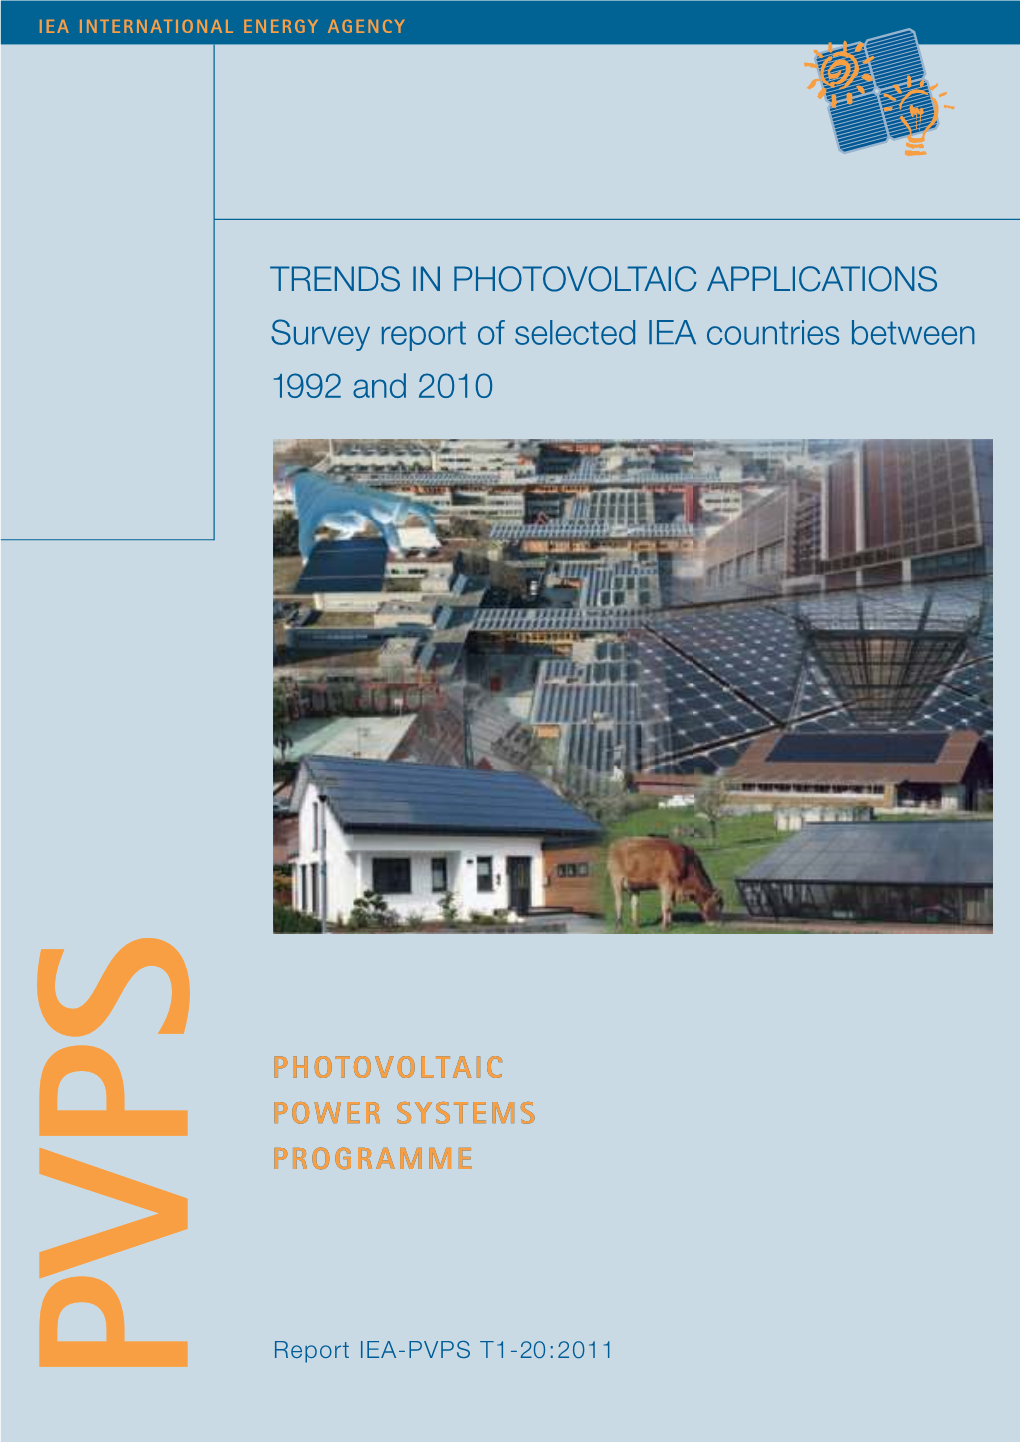 TRENDS in PHOTOVOLTAIC APPLICATIONS Survey Report of Selected IEA Countries Between 1992 and 2010